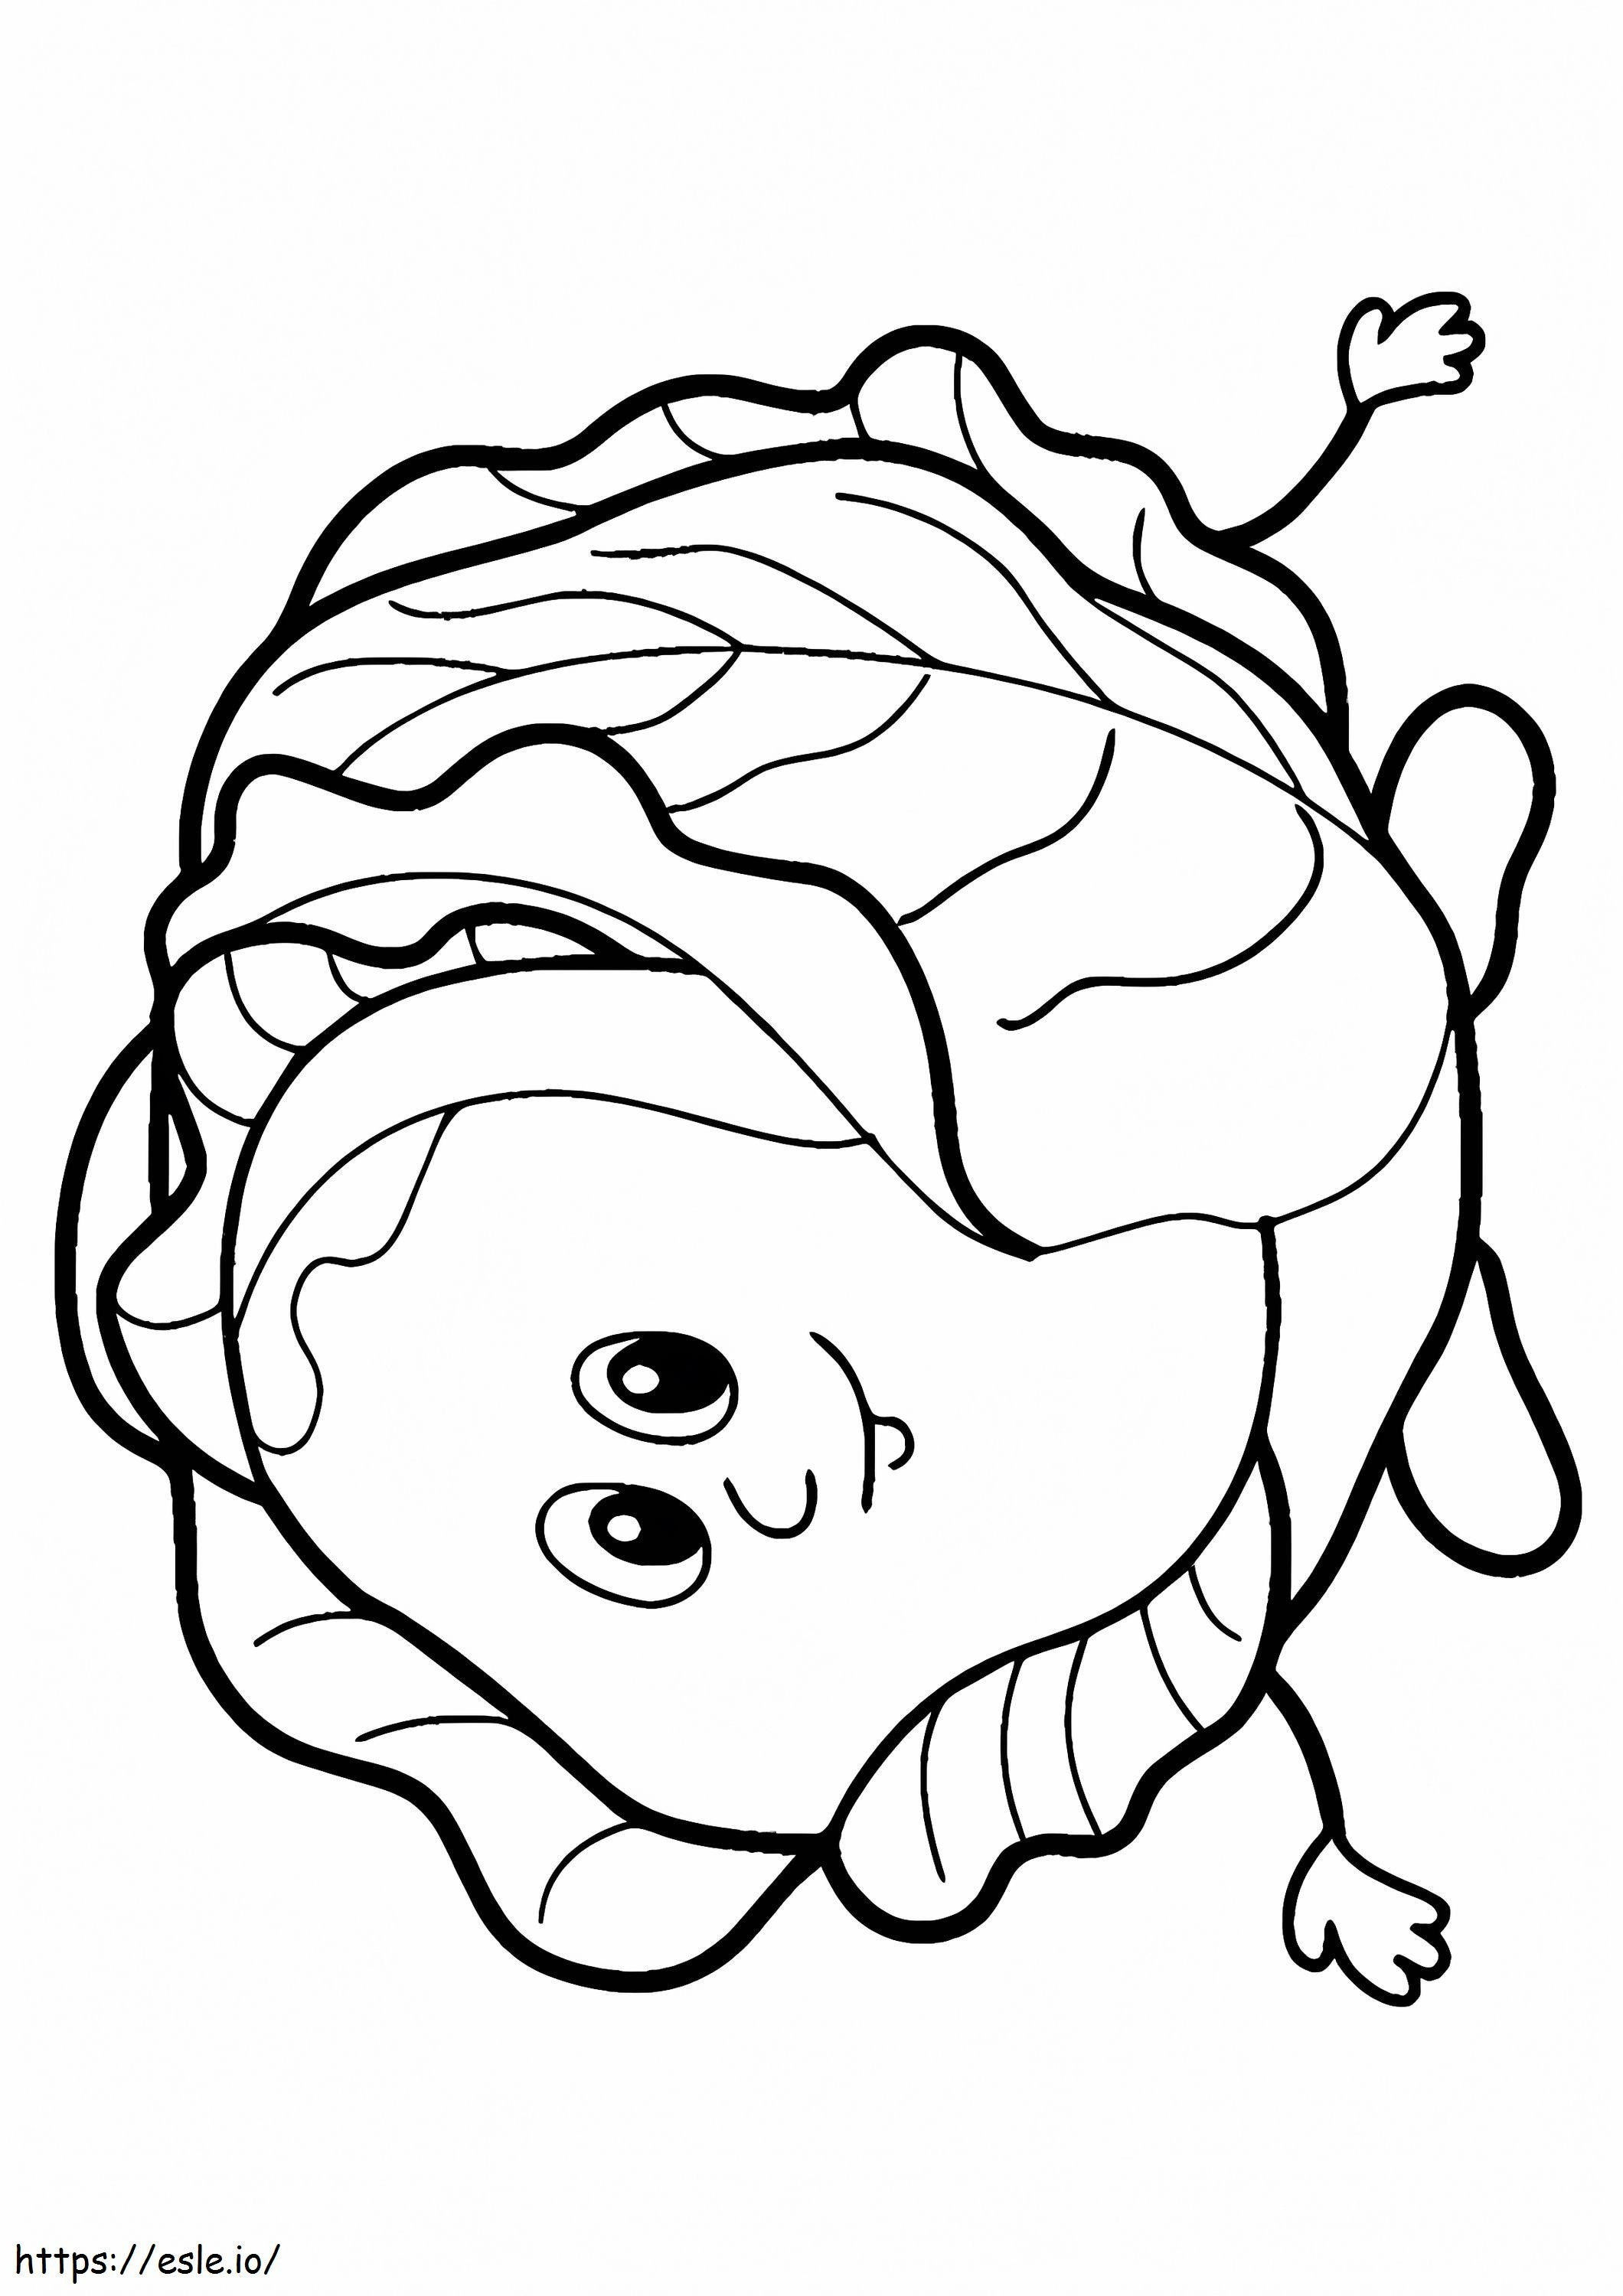 1528362023_The Cabbage Tales A4 coloring page